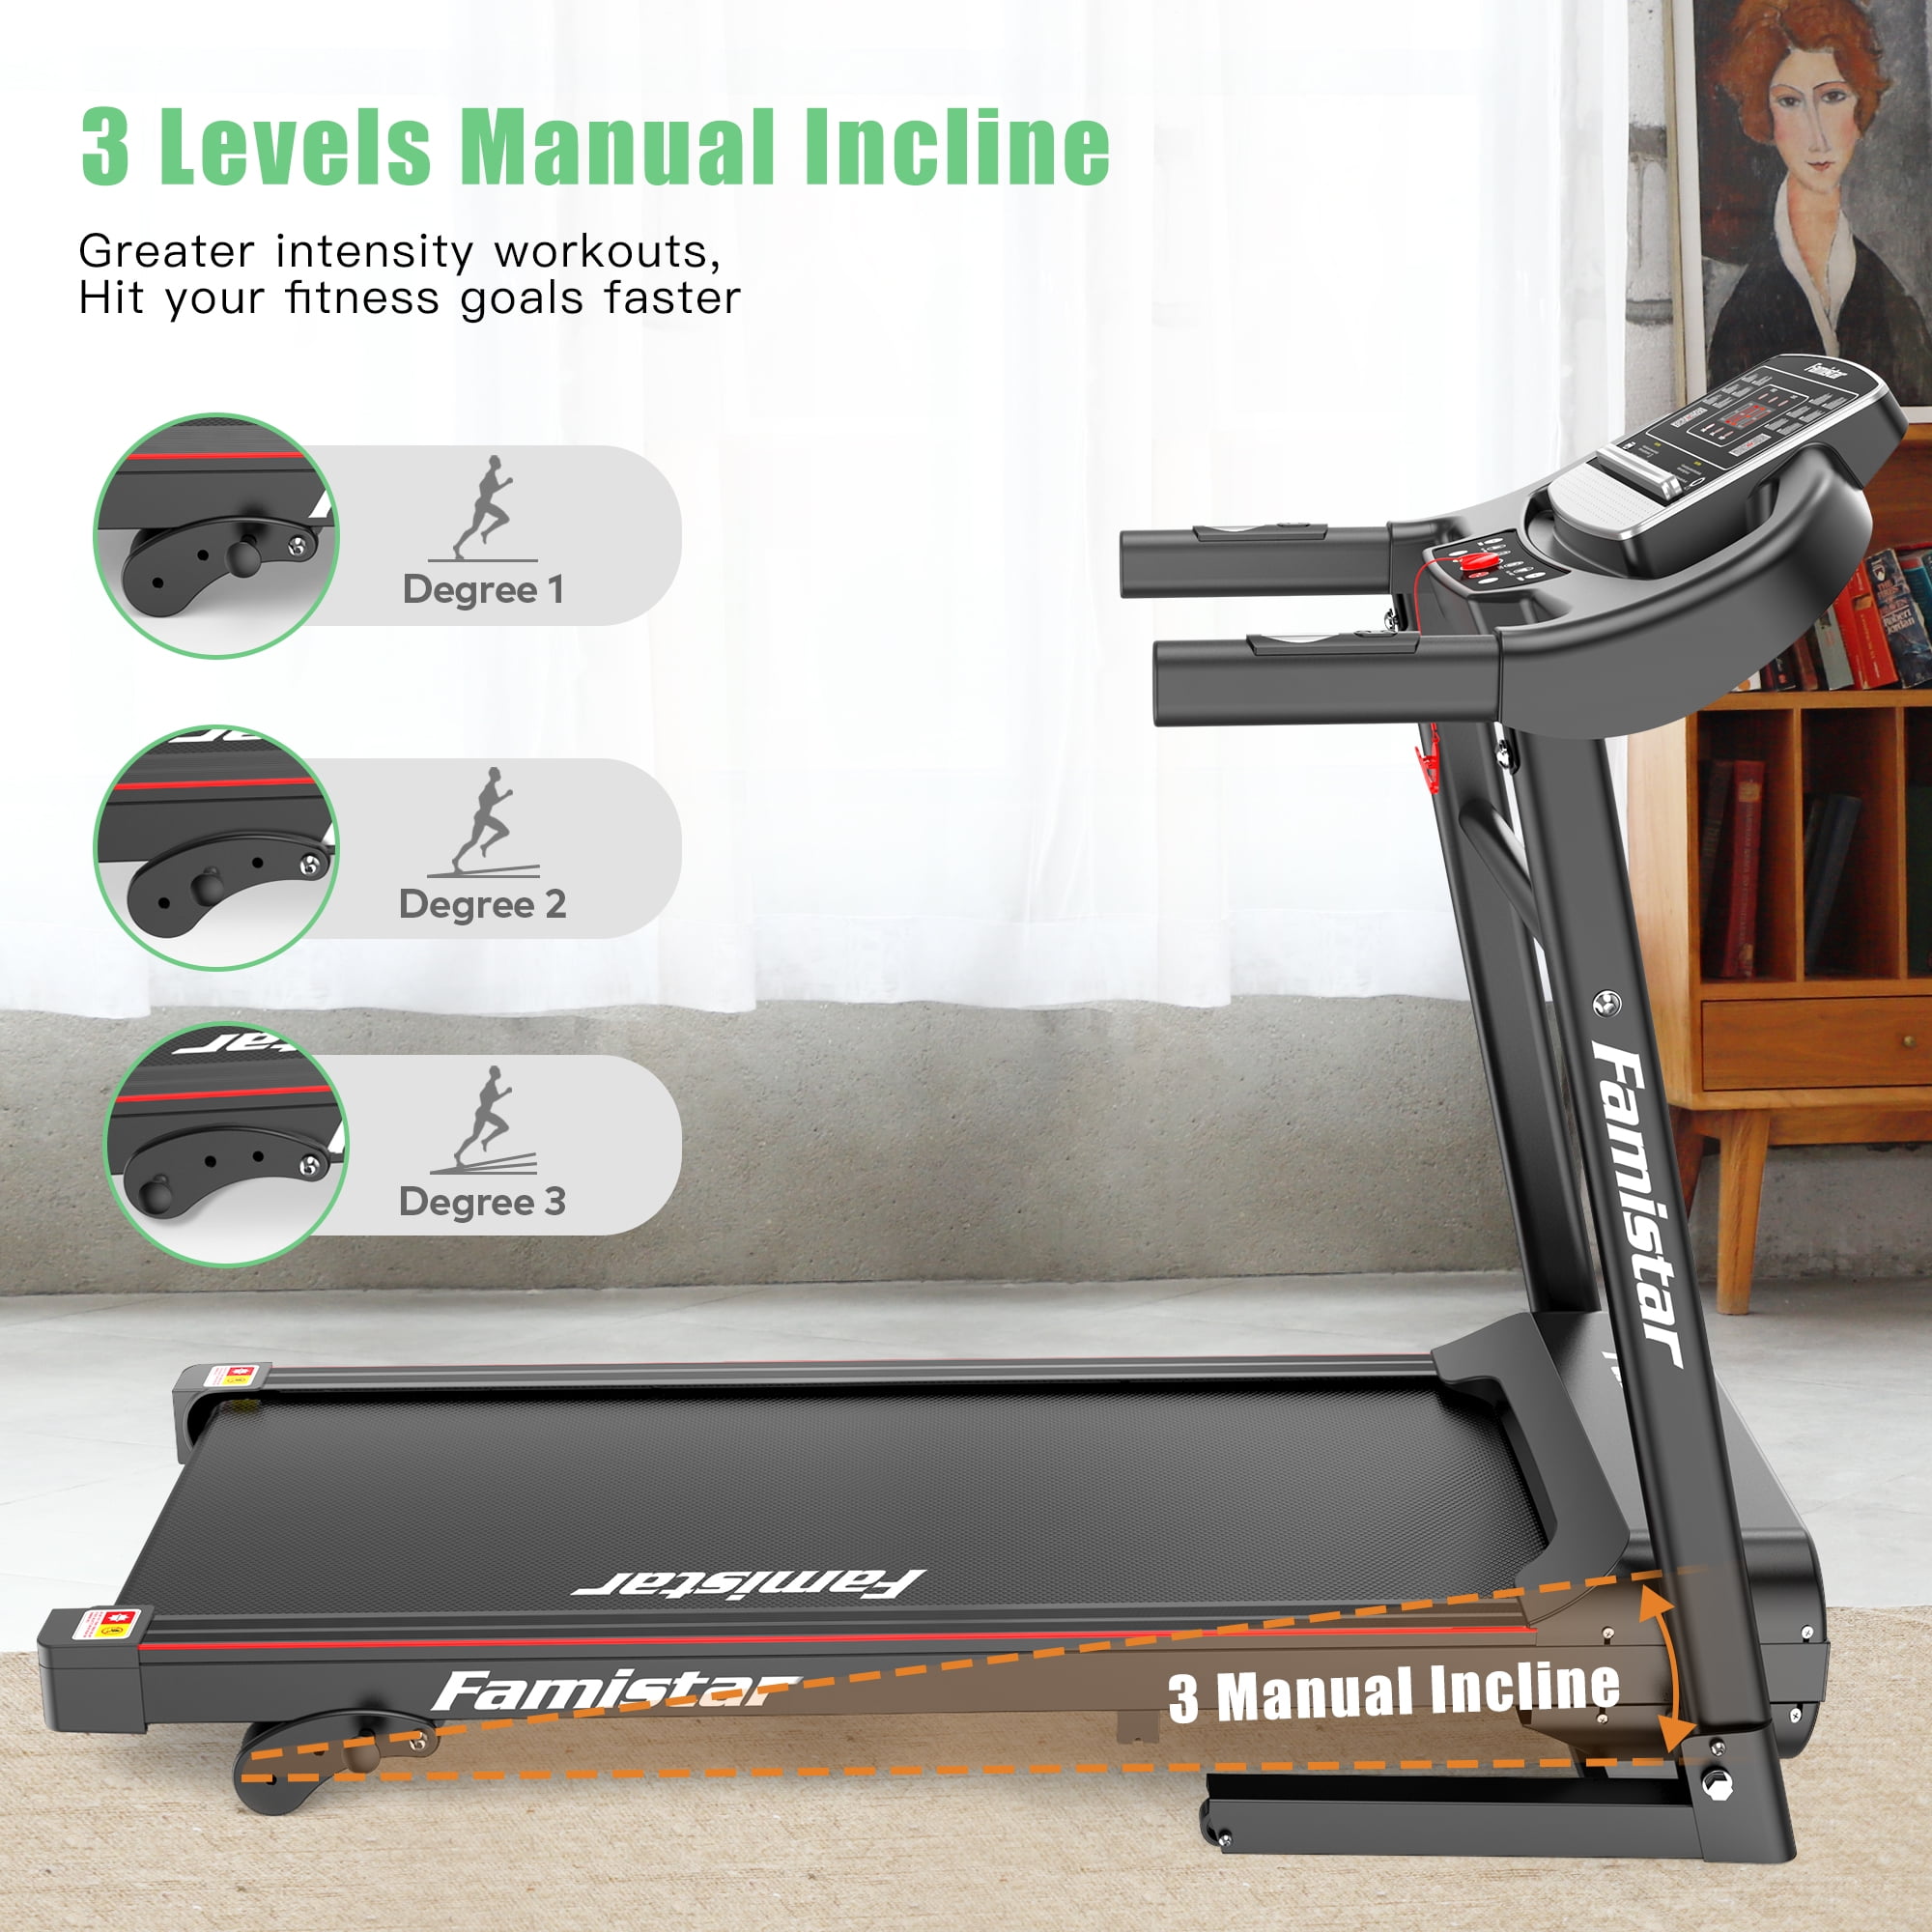 Famistar JK1607 Folding Electric Treadmill for Home Jogging Running with 2.5HP 3 Manual Incline | MP3 Player | Safety Key | LCD Display | Cup Holder - Portable Space Saving - Free Gift 2 Knee Straps - image 5 of 11